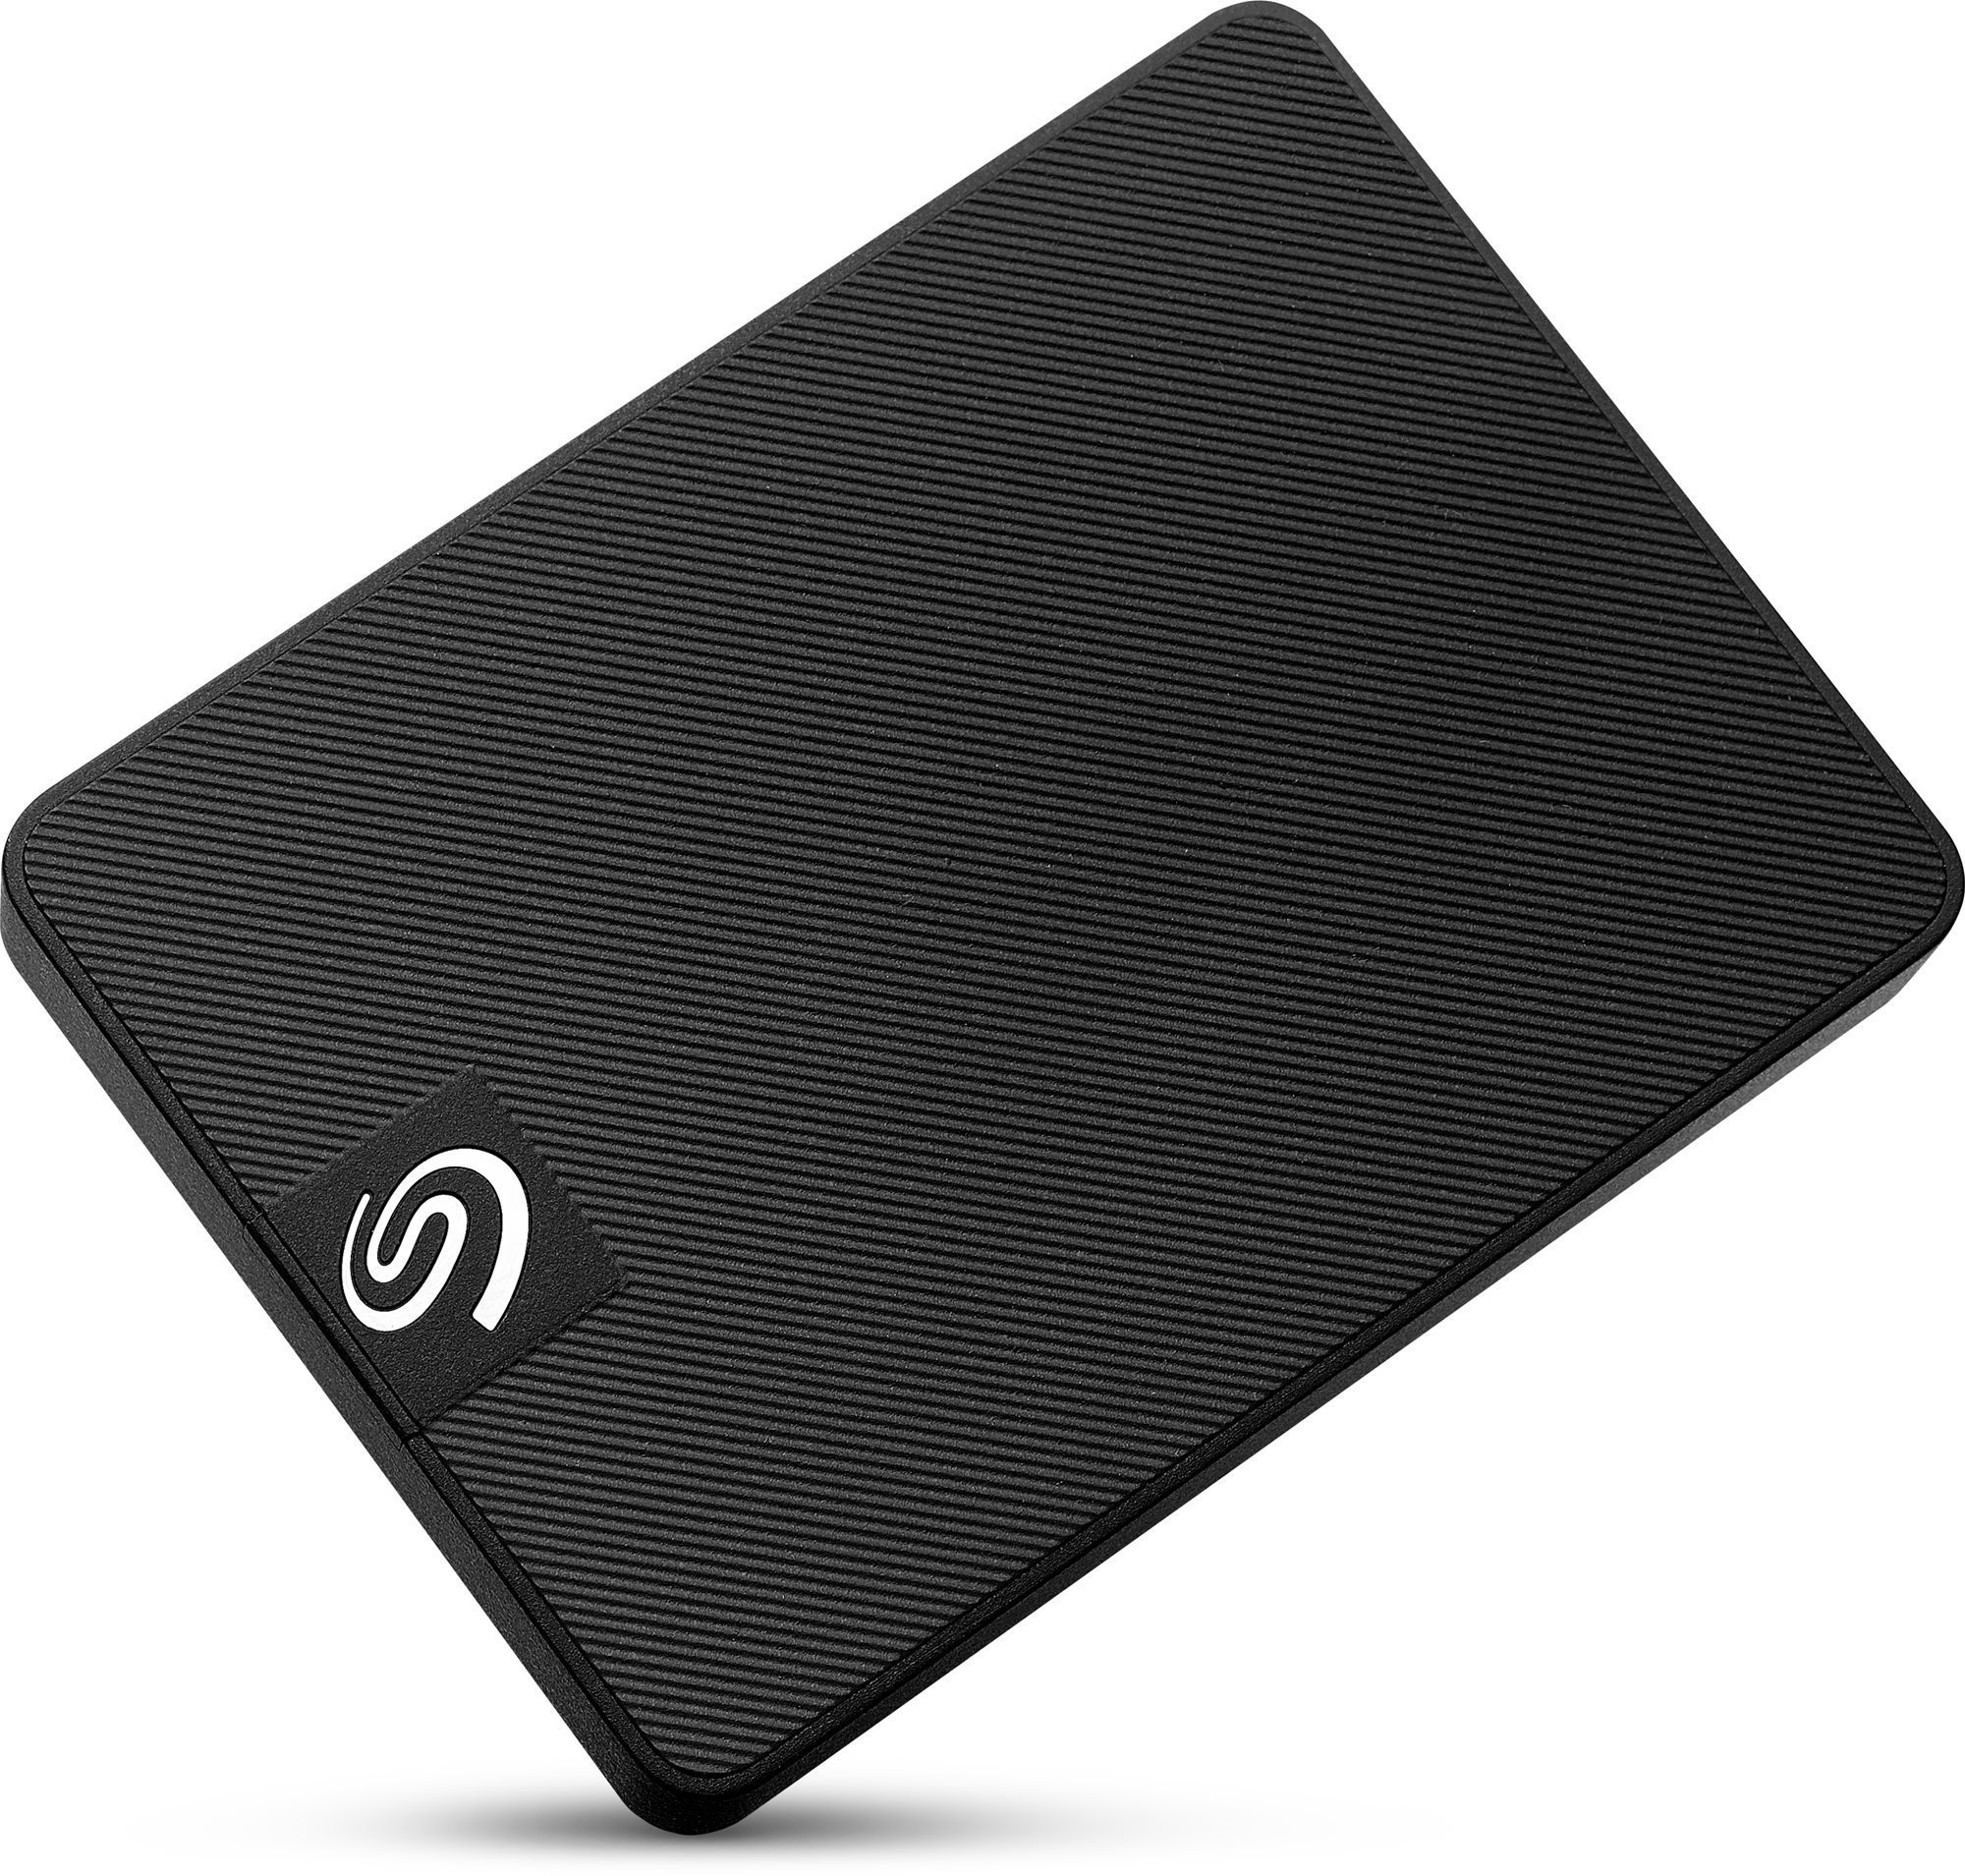 External Hard Drive Seagate Expansion SSD 500GB, Black Lateral view